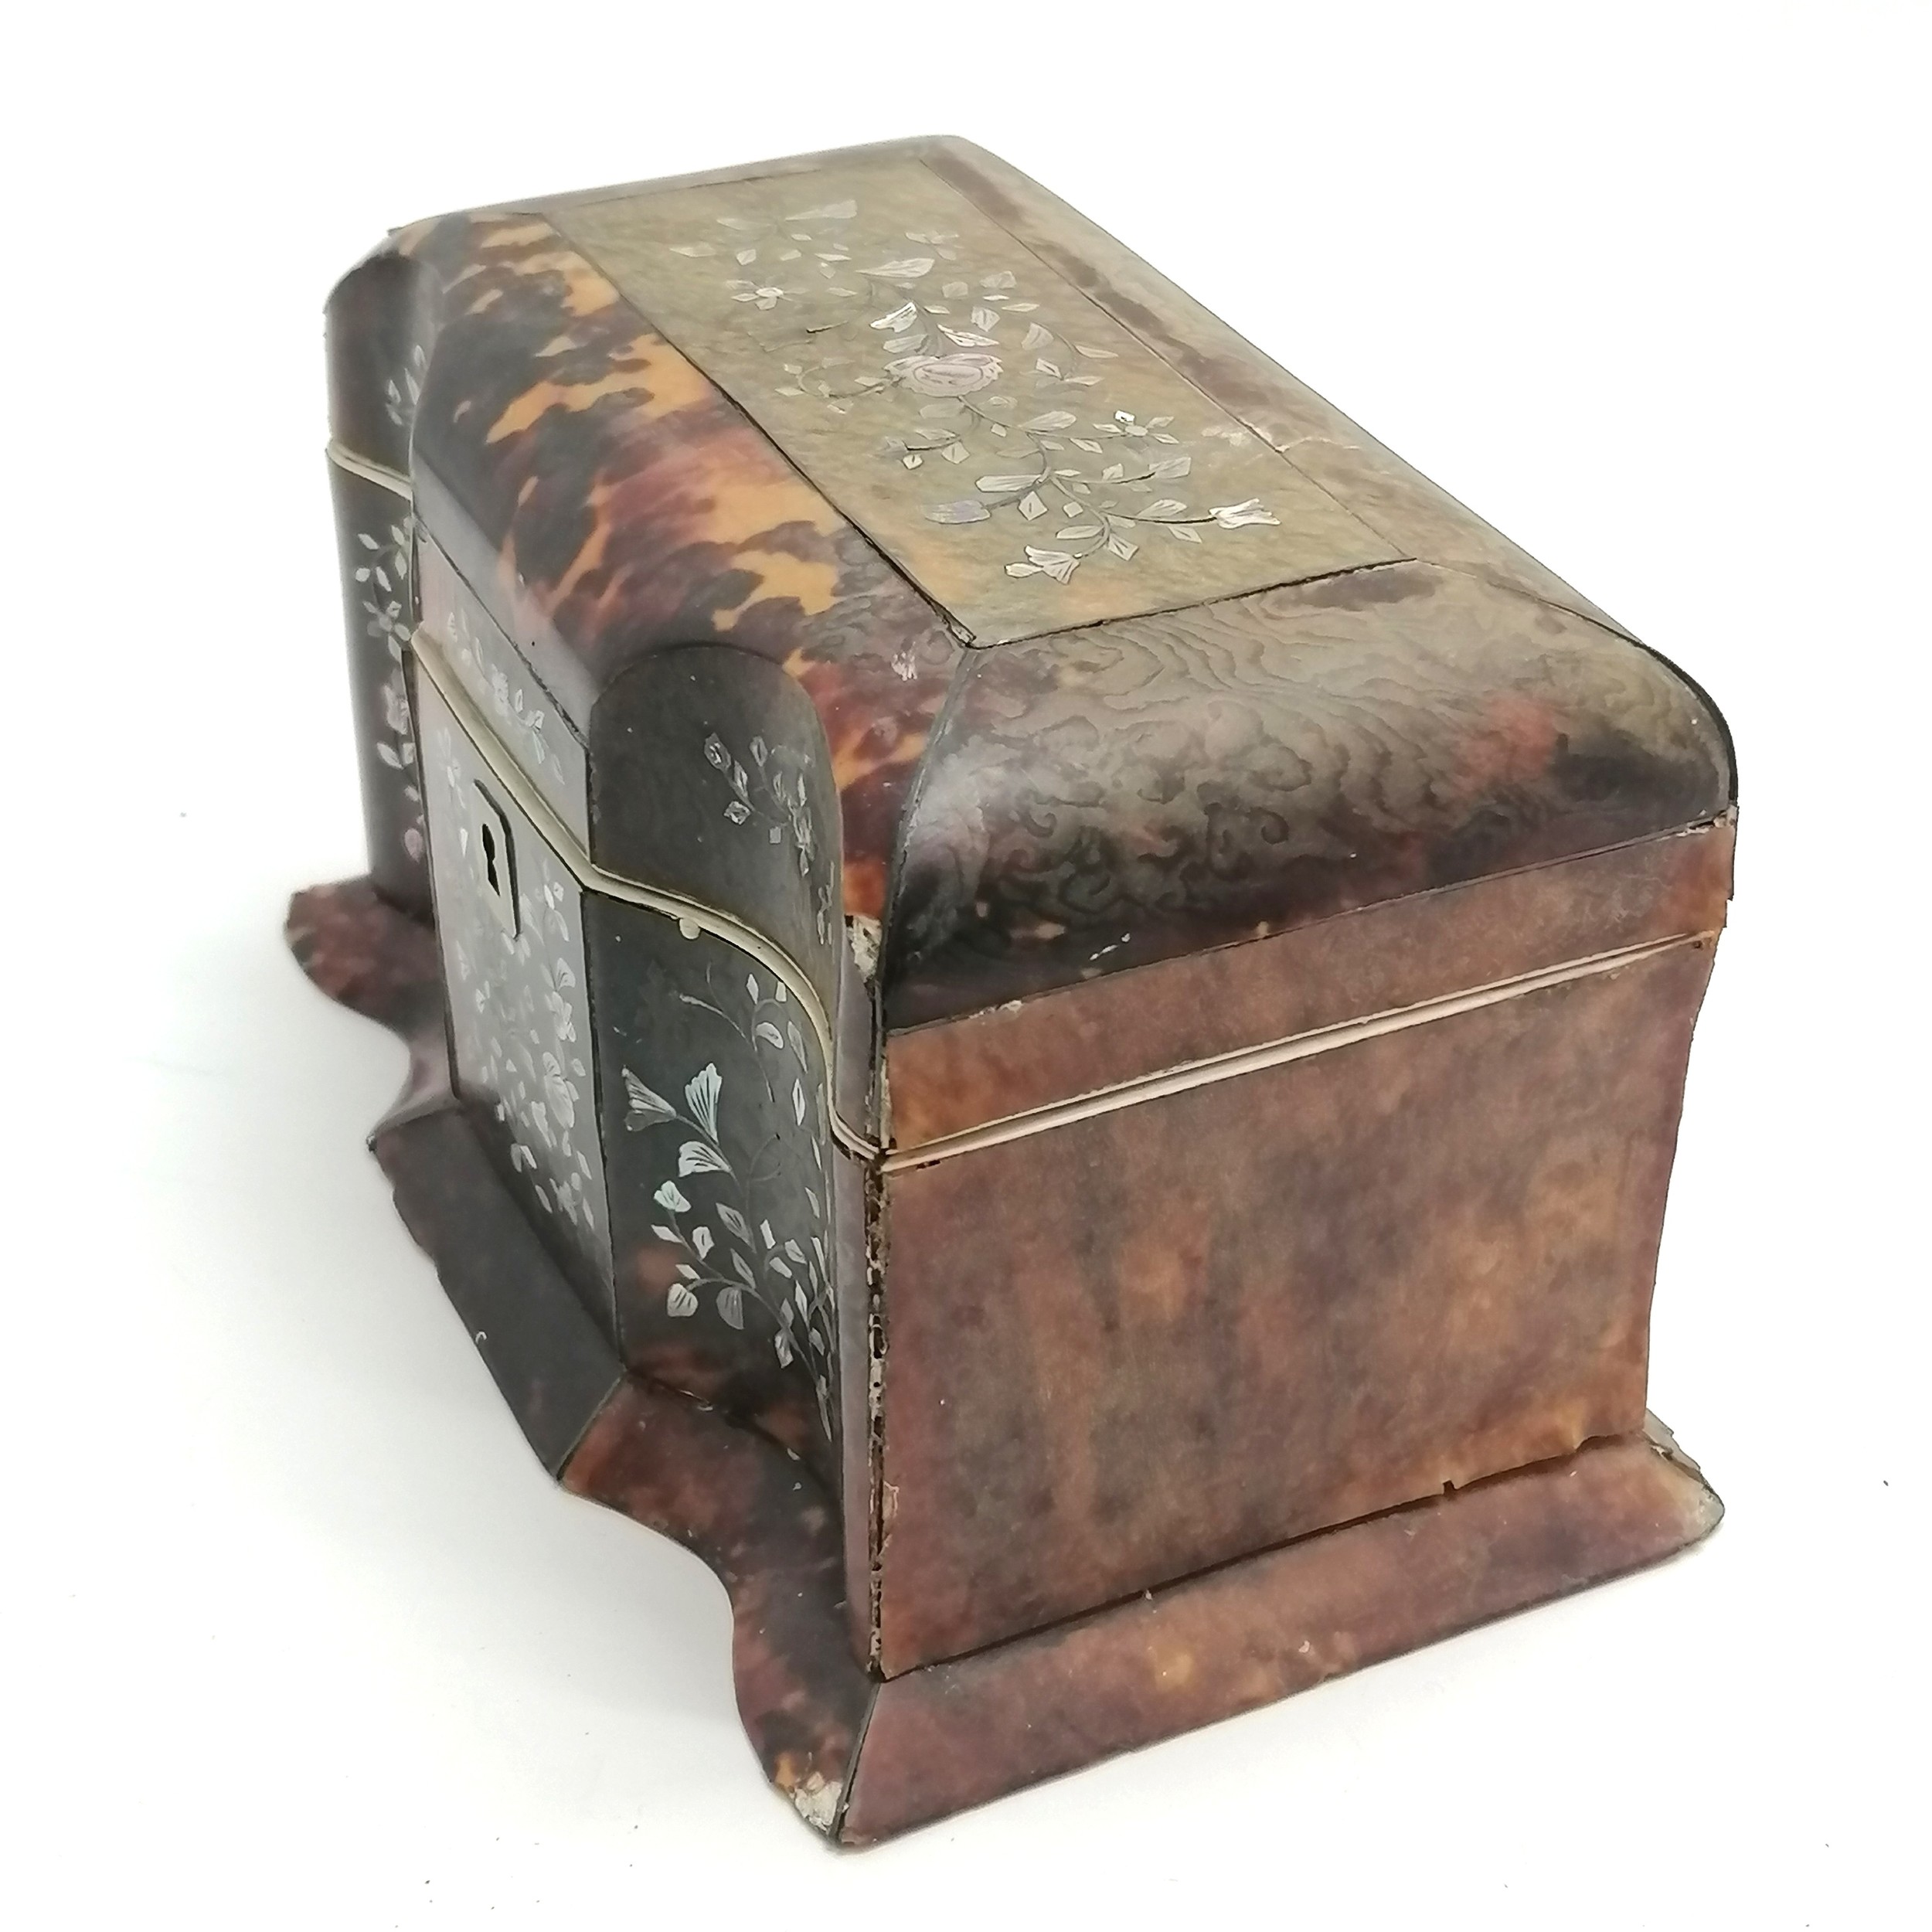 Antique tortoiseshell and mother of pearl tea caddy for restoration 20cm x 12cm x 12cm high - Image 7 of 8